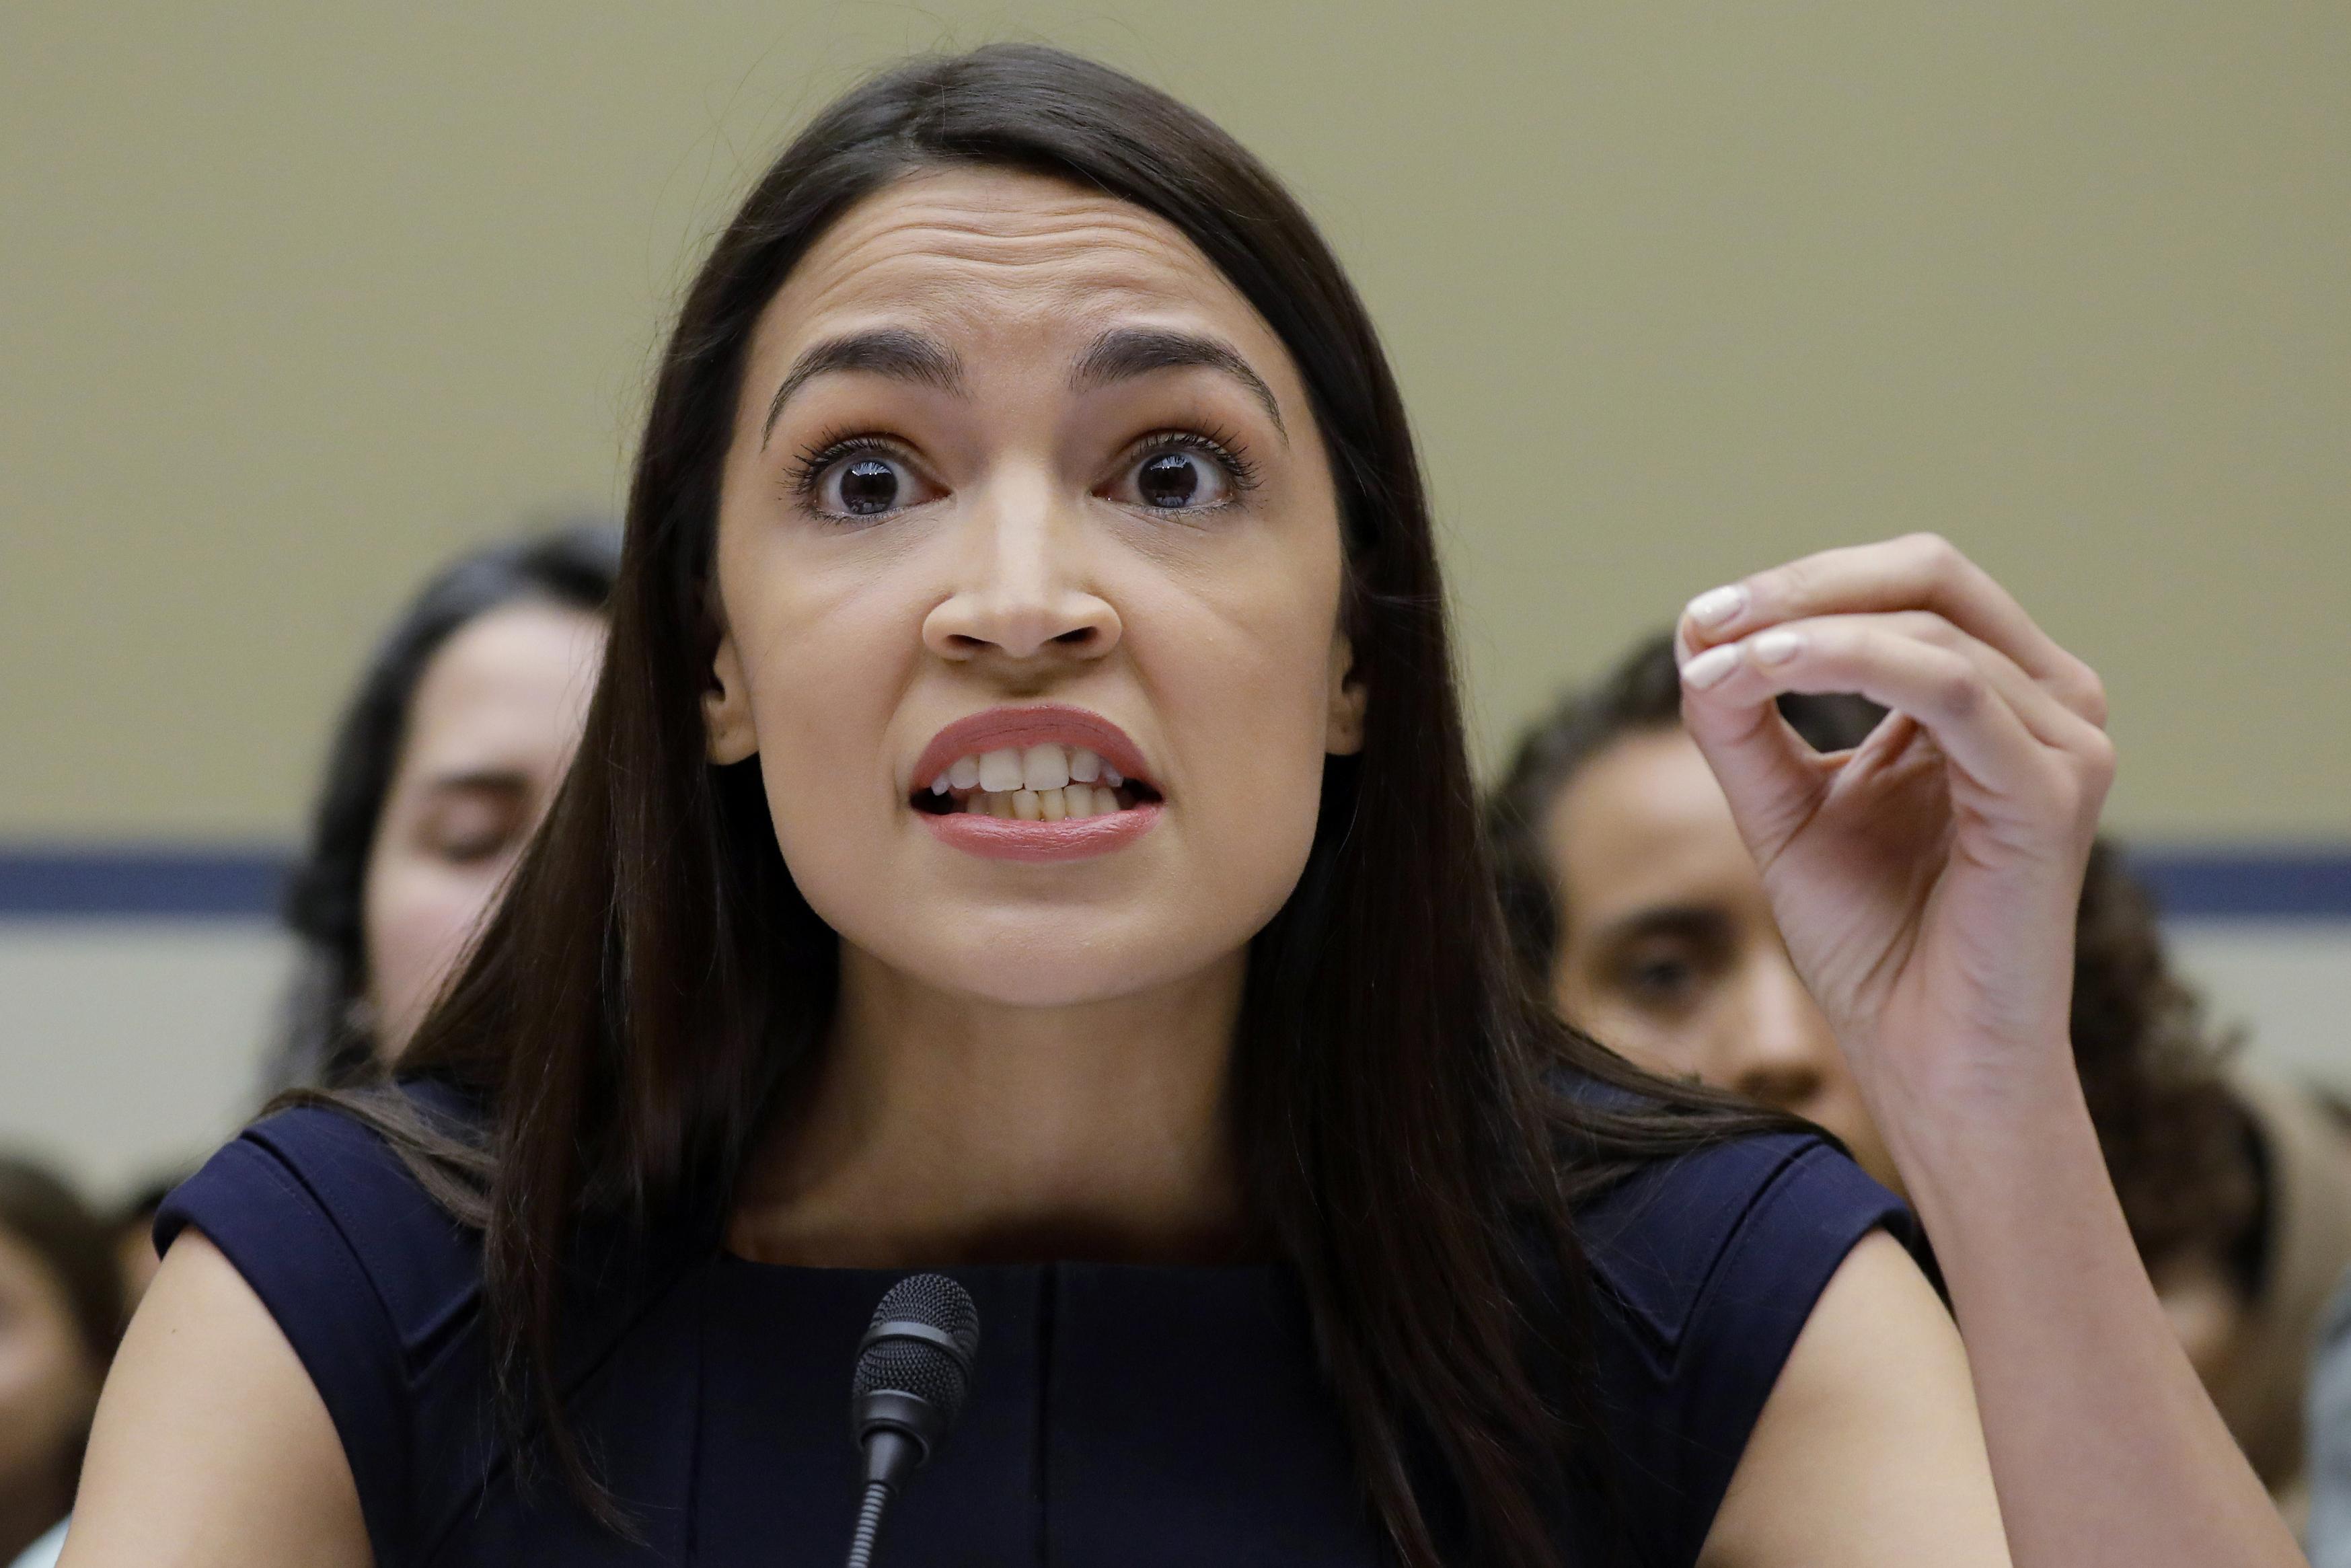 Alexandria Ocasio-Cortez fires back at Trump: 'You cannot accept that we  don't fear you' - Washington Times